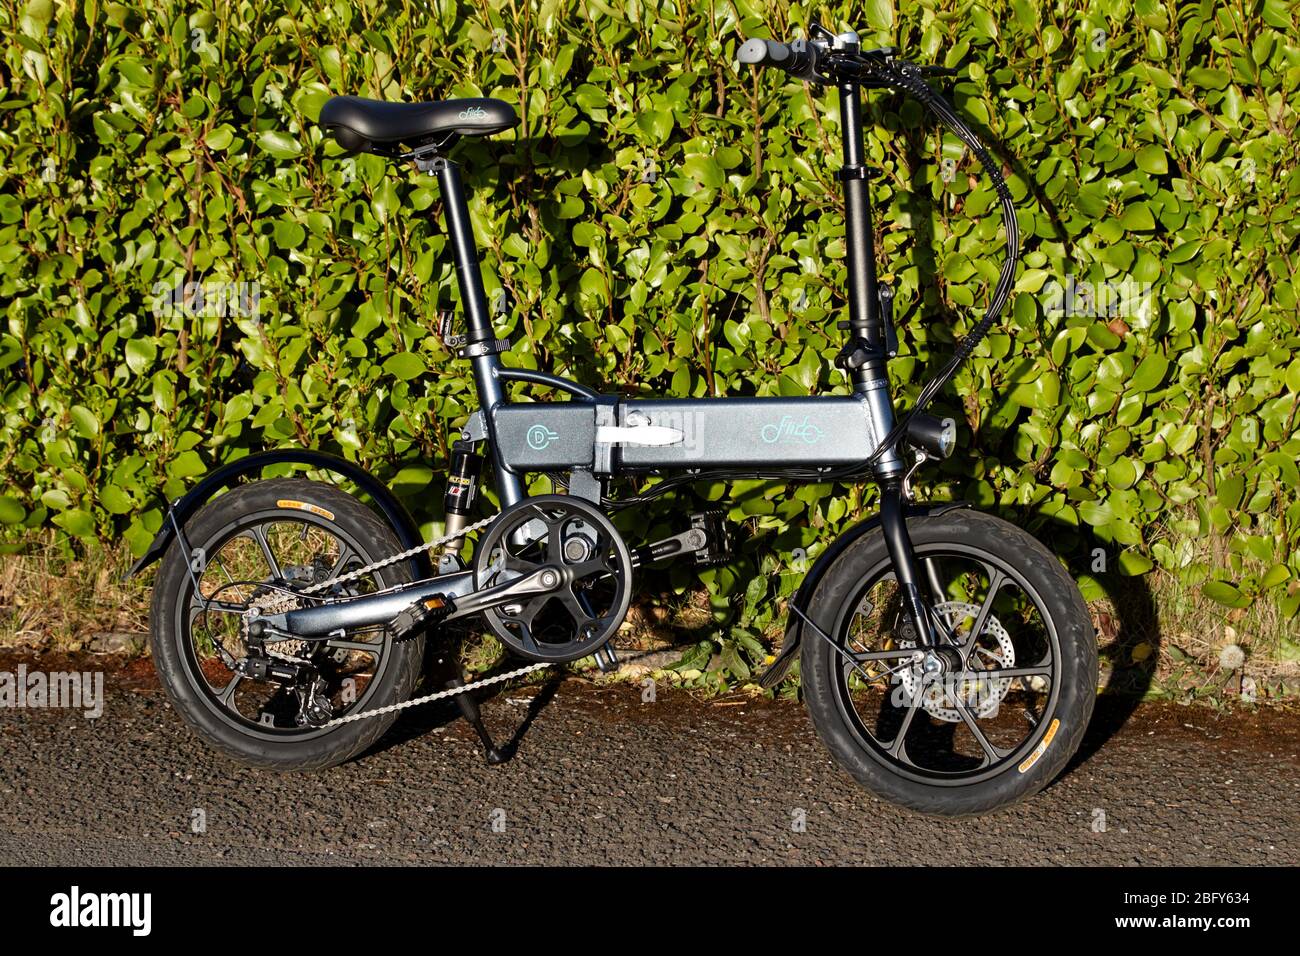 fiido d2s foldable electric bike road legal in the uk Stock Photo